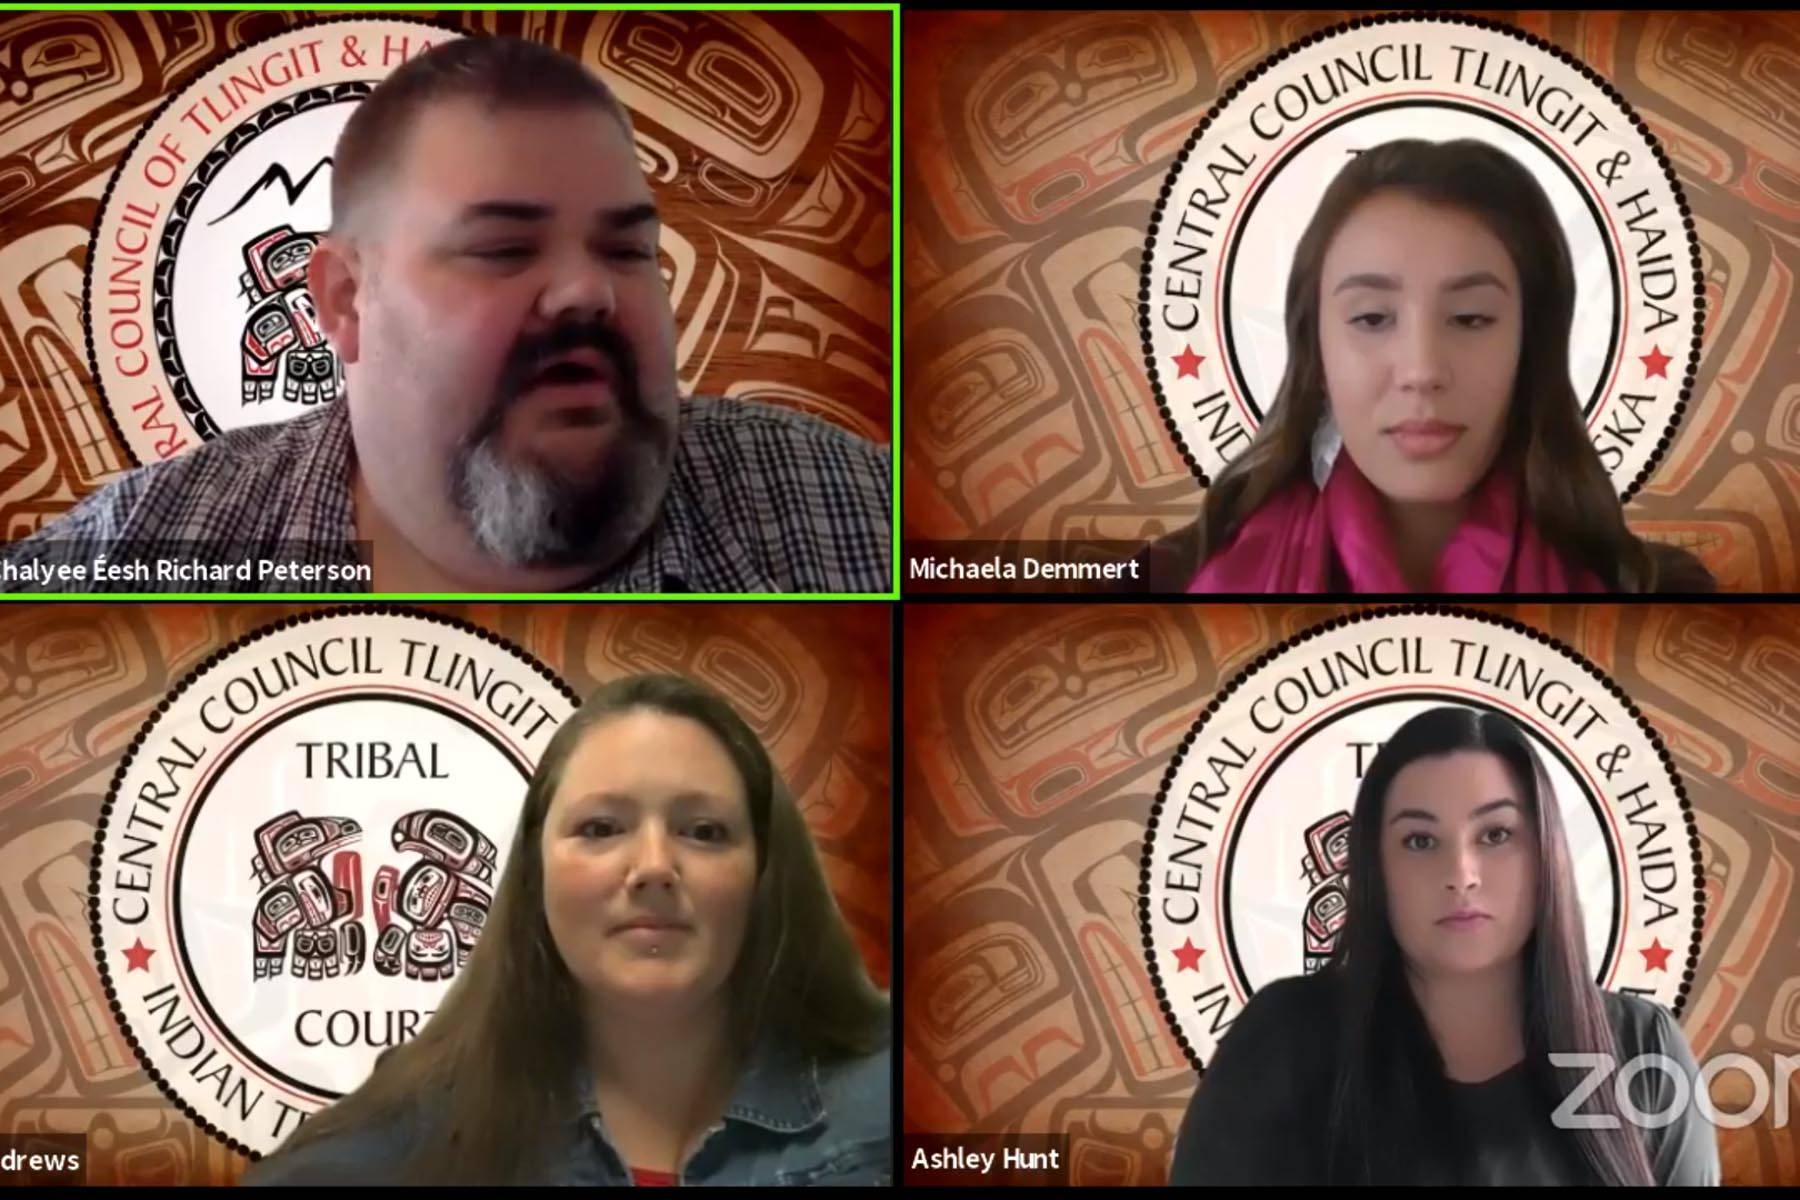 Members of Tlingit and Haida’s lunchtime chat discuss the tribal courts system over web conference on June 25, 2020. (Screenshot)